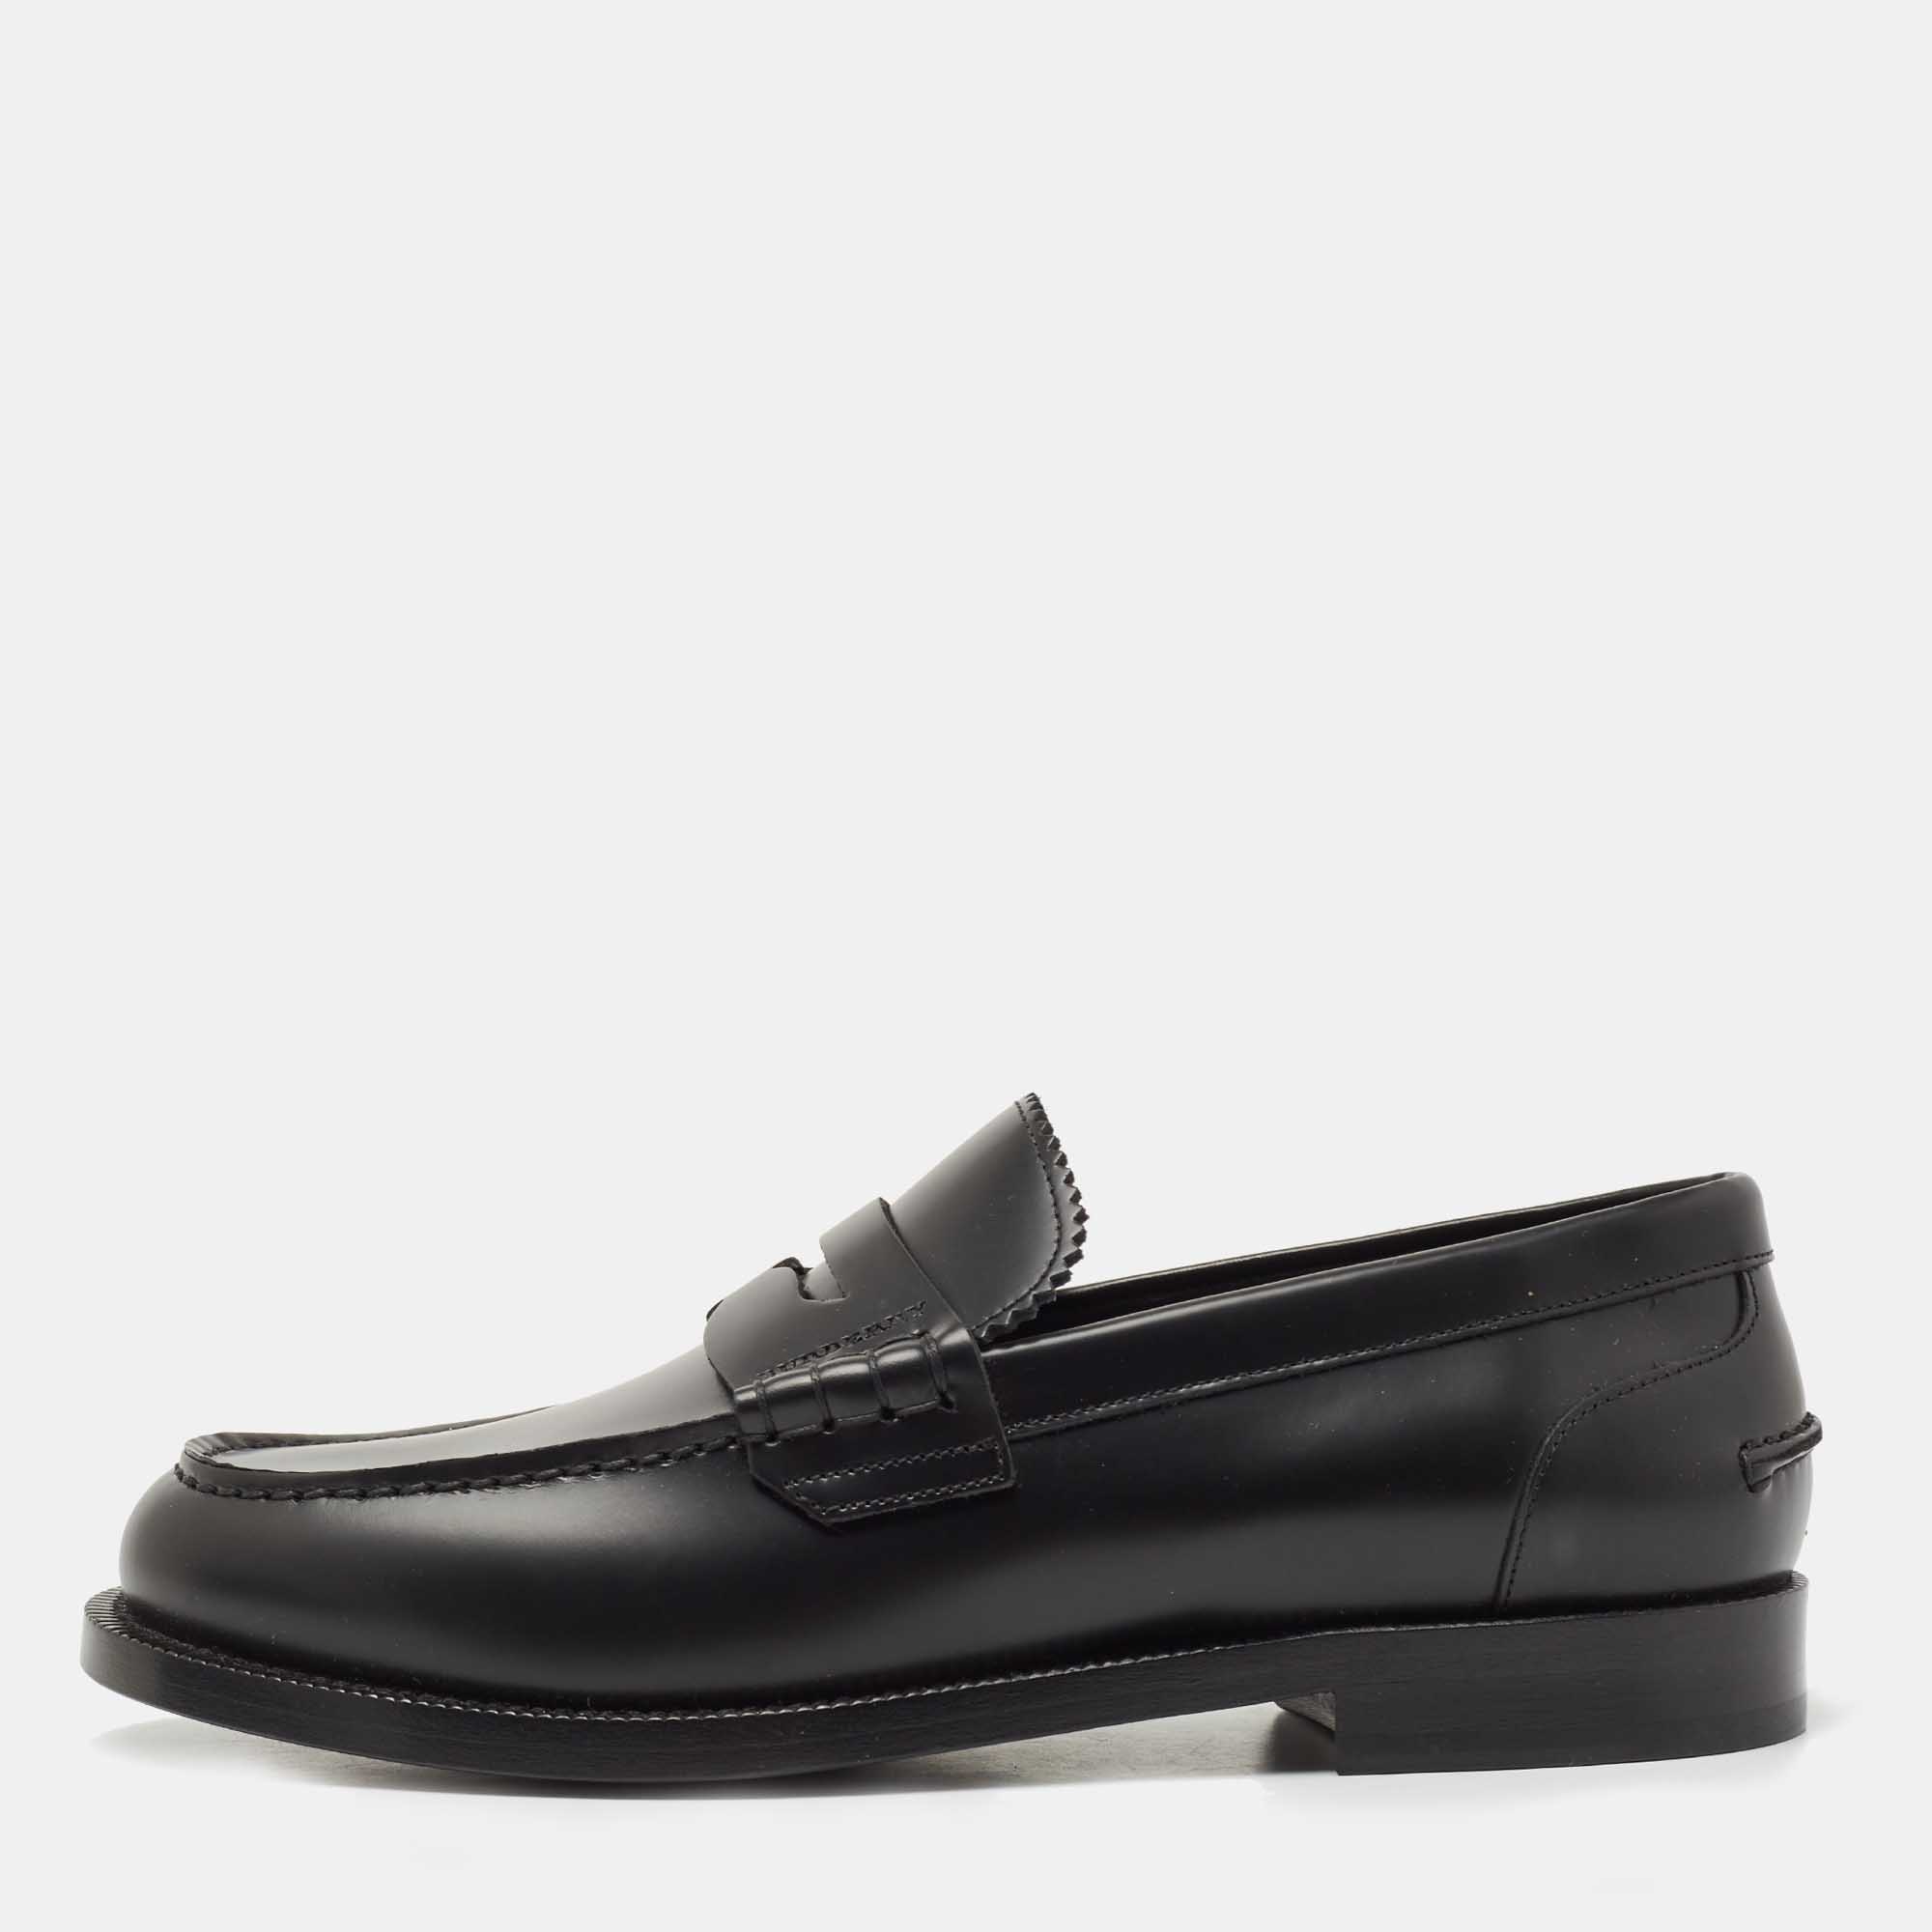 Burberry Black Leather Slip On Loafers Size 39.5 Burberry | The Luxury ...